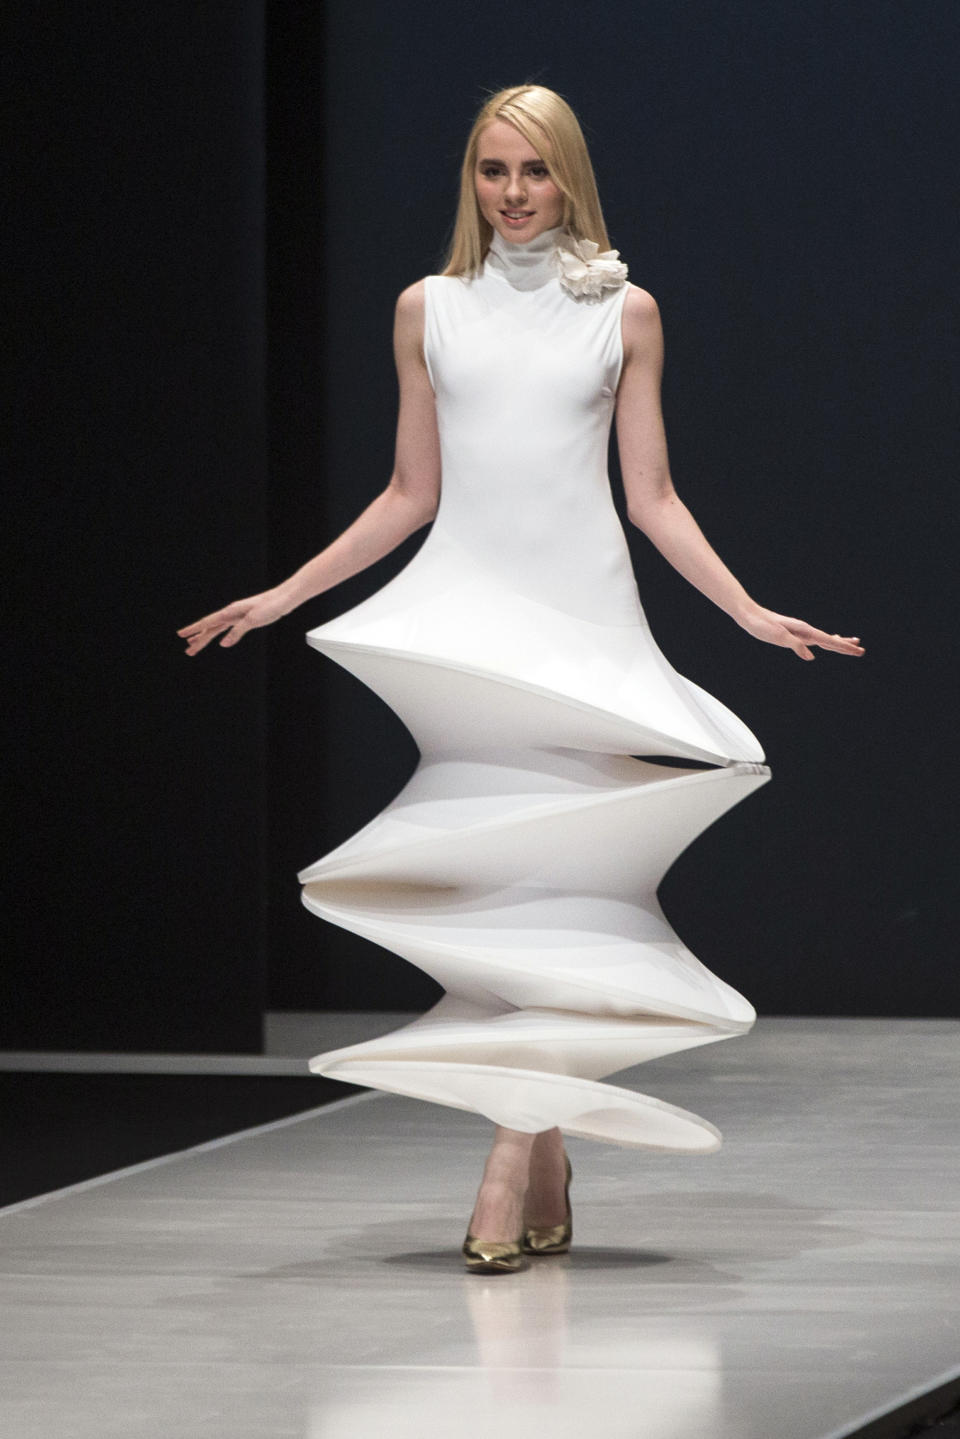 FILE - In this March 22, 2016 file photo, a model displays a creation by French fashion designer Pierre Cardin during Moscow Fashion Week, Russia. Pierre Cardin, the French designer whose famous name embossed myriad consumer products after his iconic Space Age styles shot him into the fashion stratosphere in the 1960s, has died, the French Academy of Fine Arts said Tuesday. He was 98. (AP Photo/Pavel Golovkin, File)